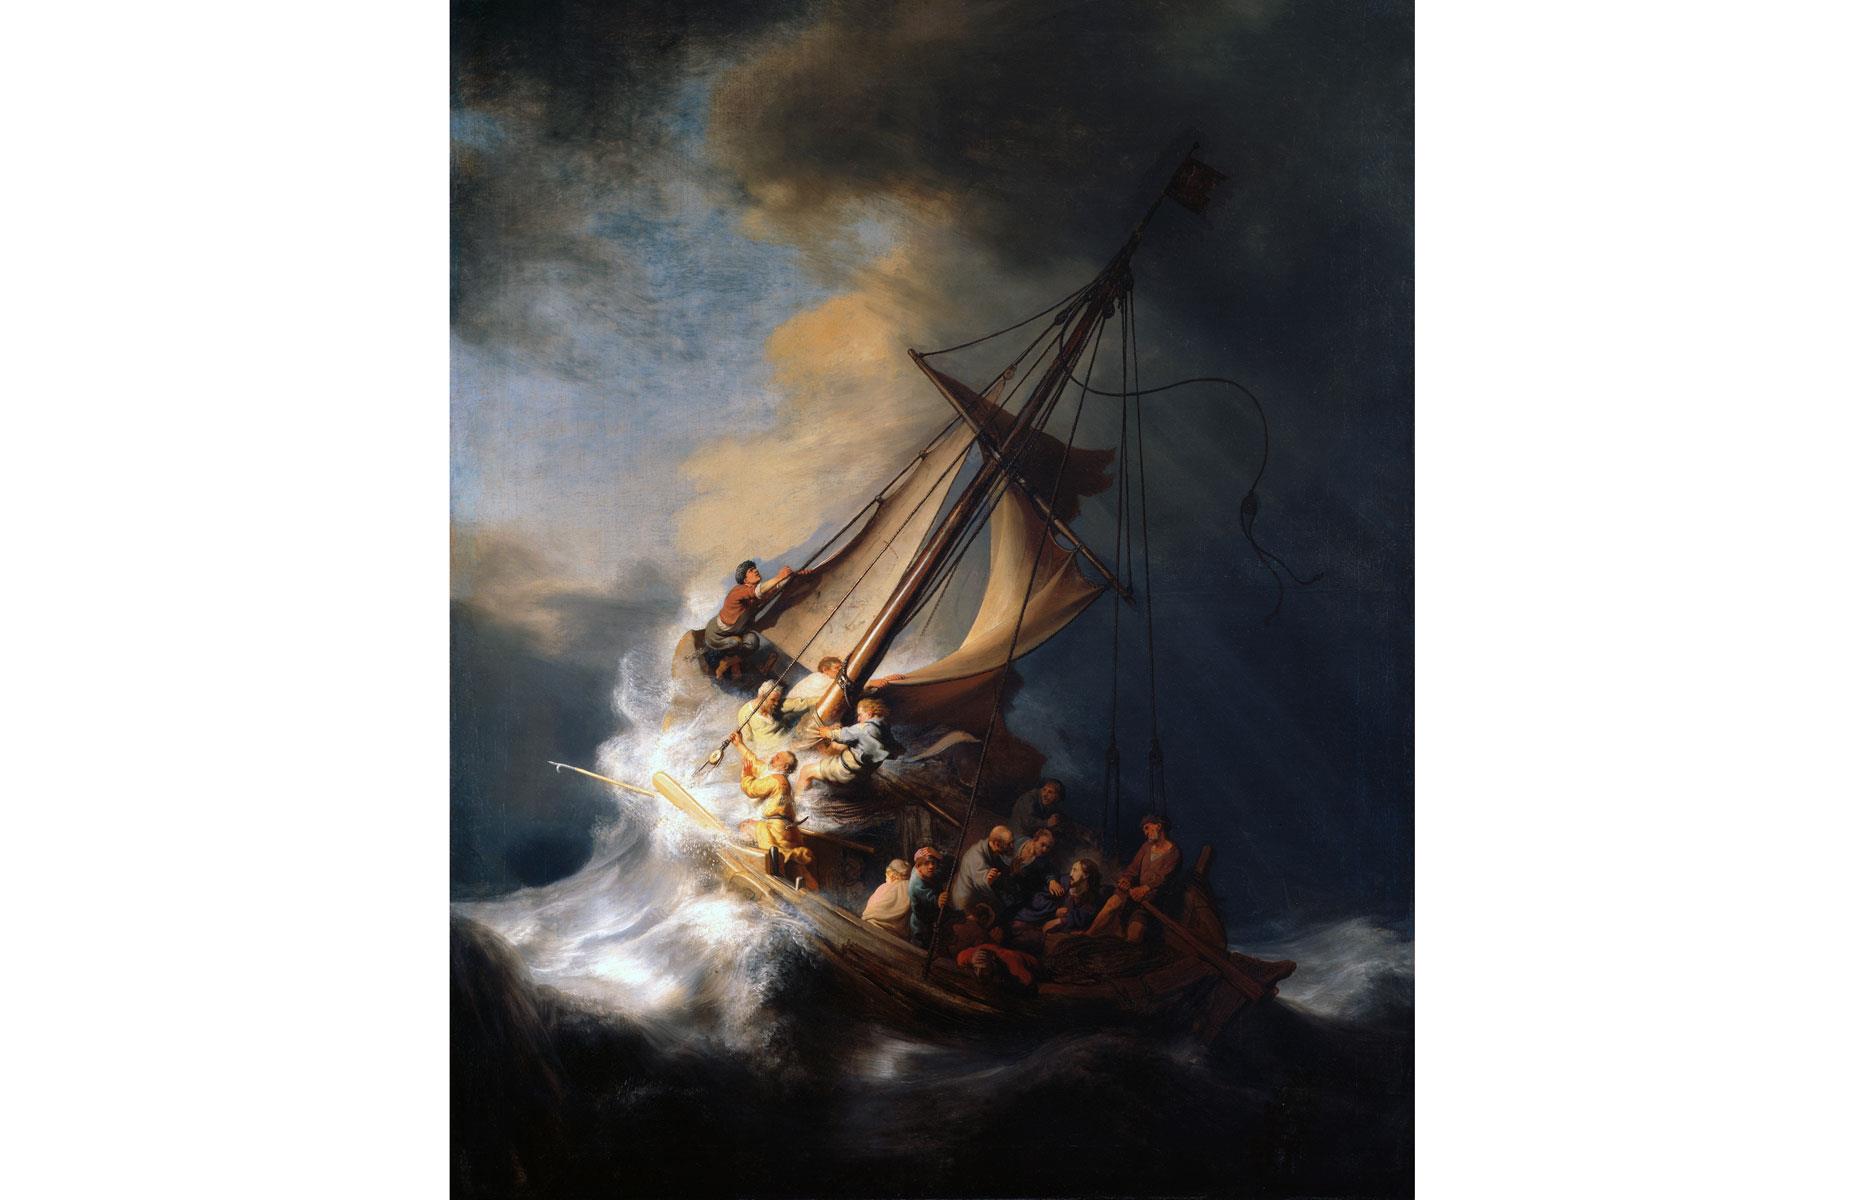 Rembrandt's The Storm on the Sea of Galilee, value: $100 million (£77.5m) – priceless